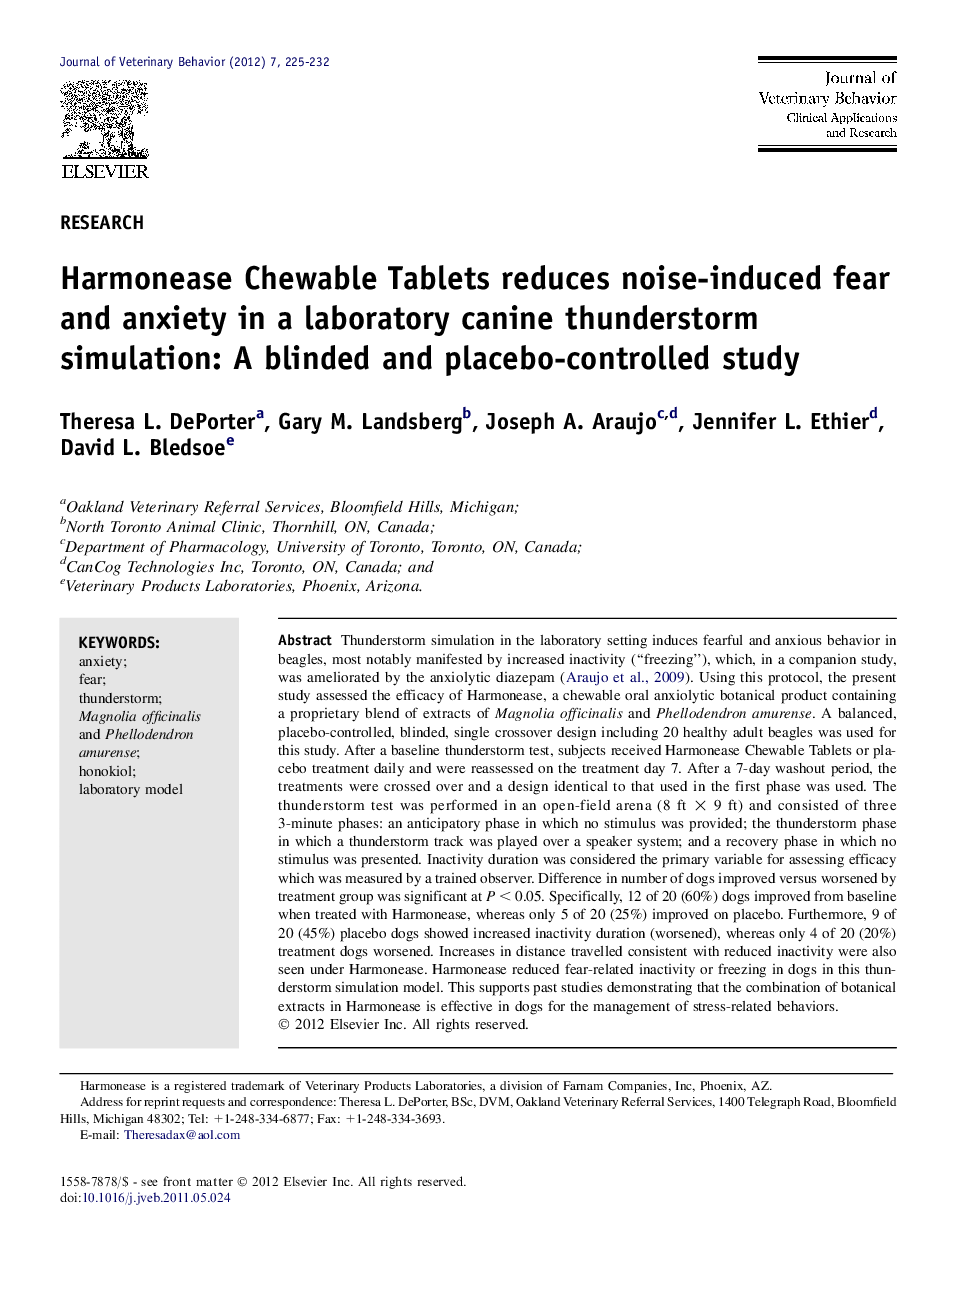 Harmonease Chewable Tablets reduces noise-induced fear and anxiety in a laboratory canine thunderstorm simulation: A blinded and placebo-controlled study 